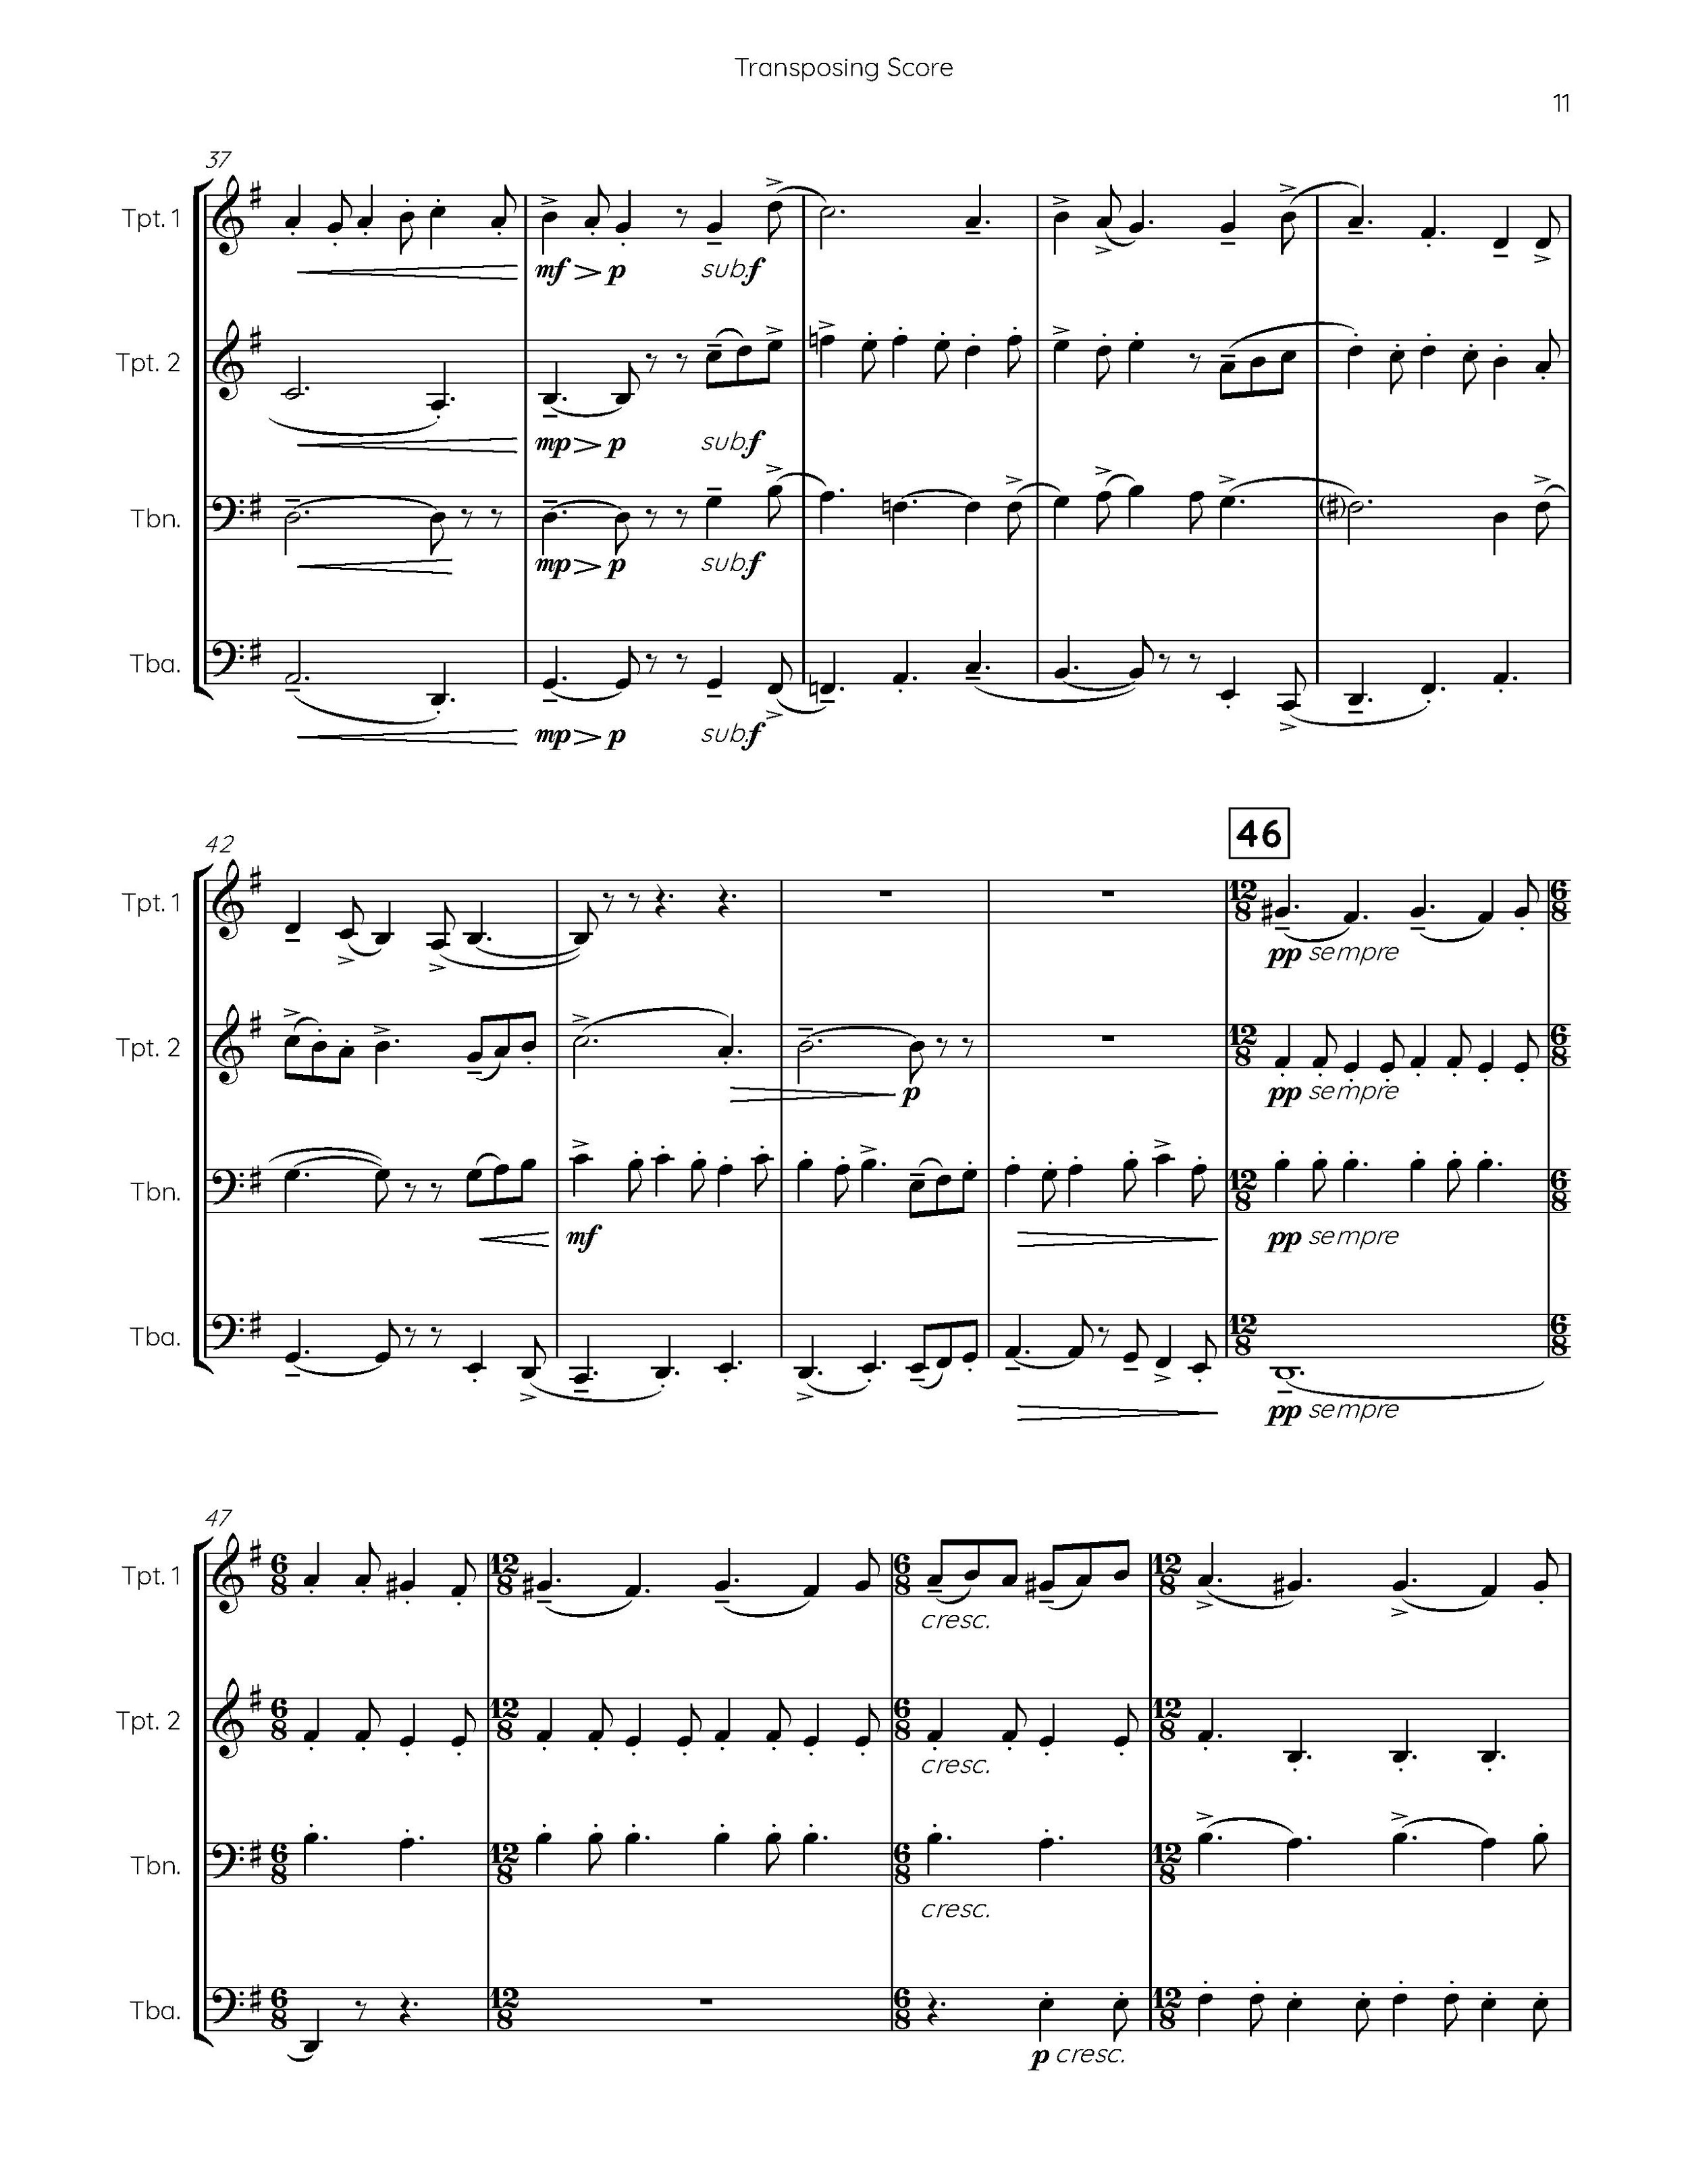 v1.2 Journey to the Ends of the World I. Horn Call - Transposing Score_Page_11.jpg